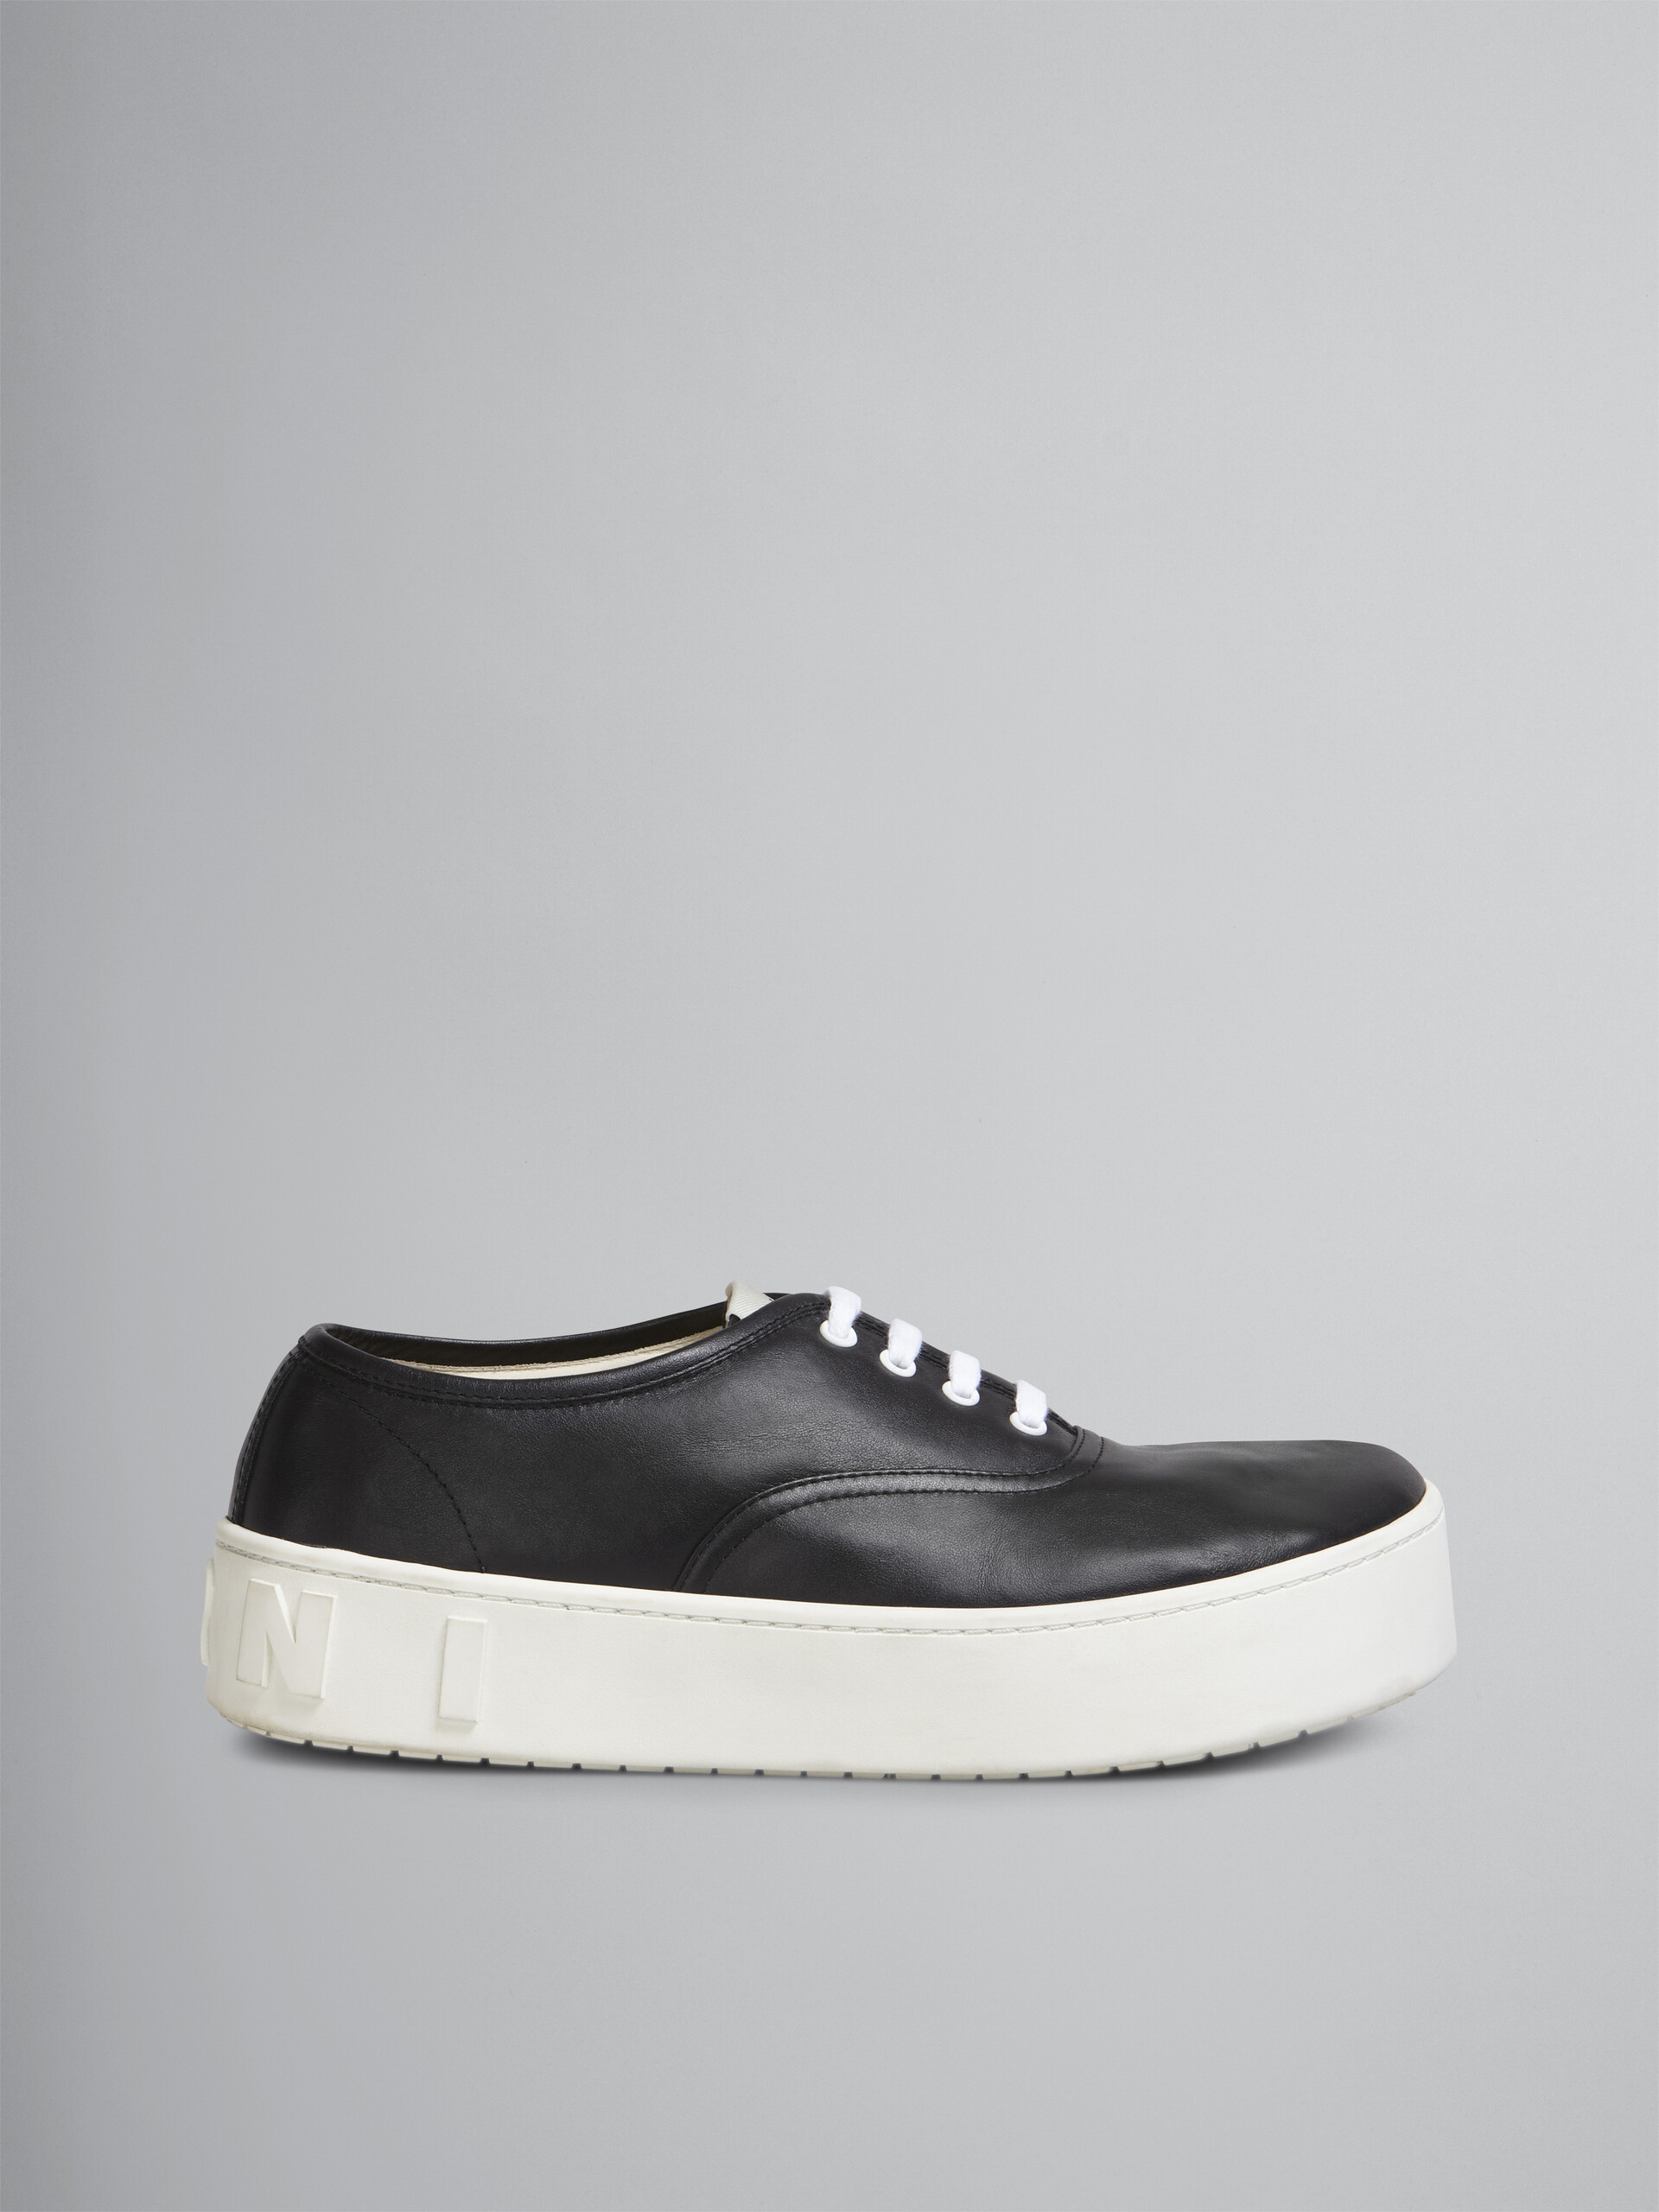 Black leather sneaker with maxi logo - Sneakers - Image 1